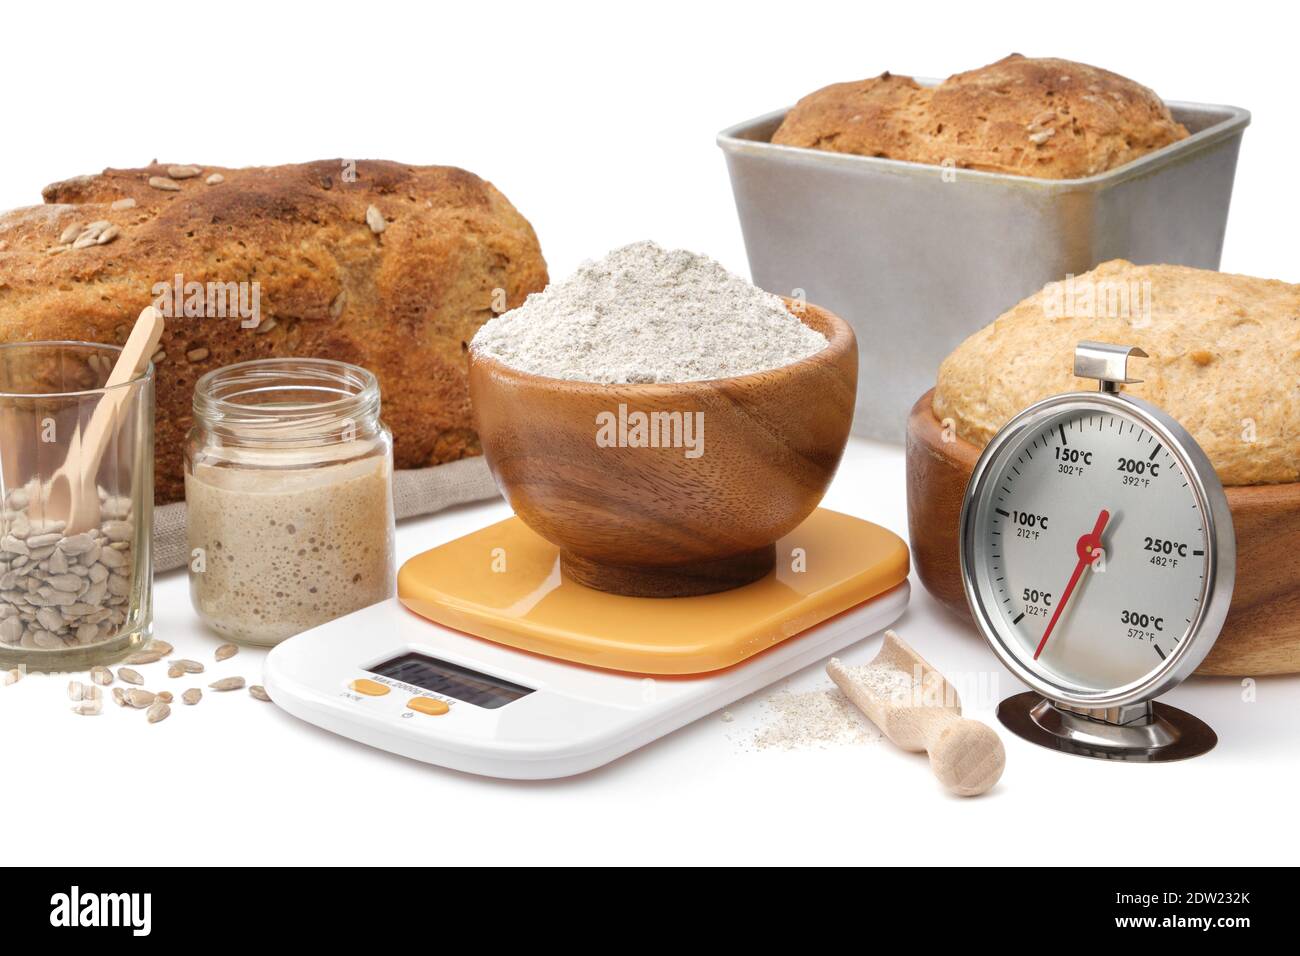 Homemade sourdough bread, natural leaven for bread in a glass jar, wooden  bowl of dough, kitchen scale, a bowl of flour and oven thermometer on white  Stock Photo - Alamy